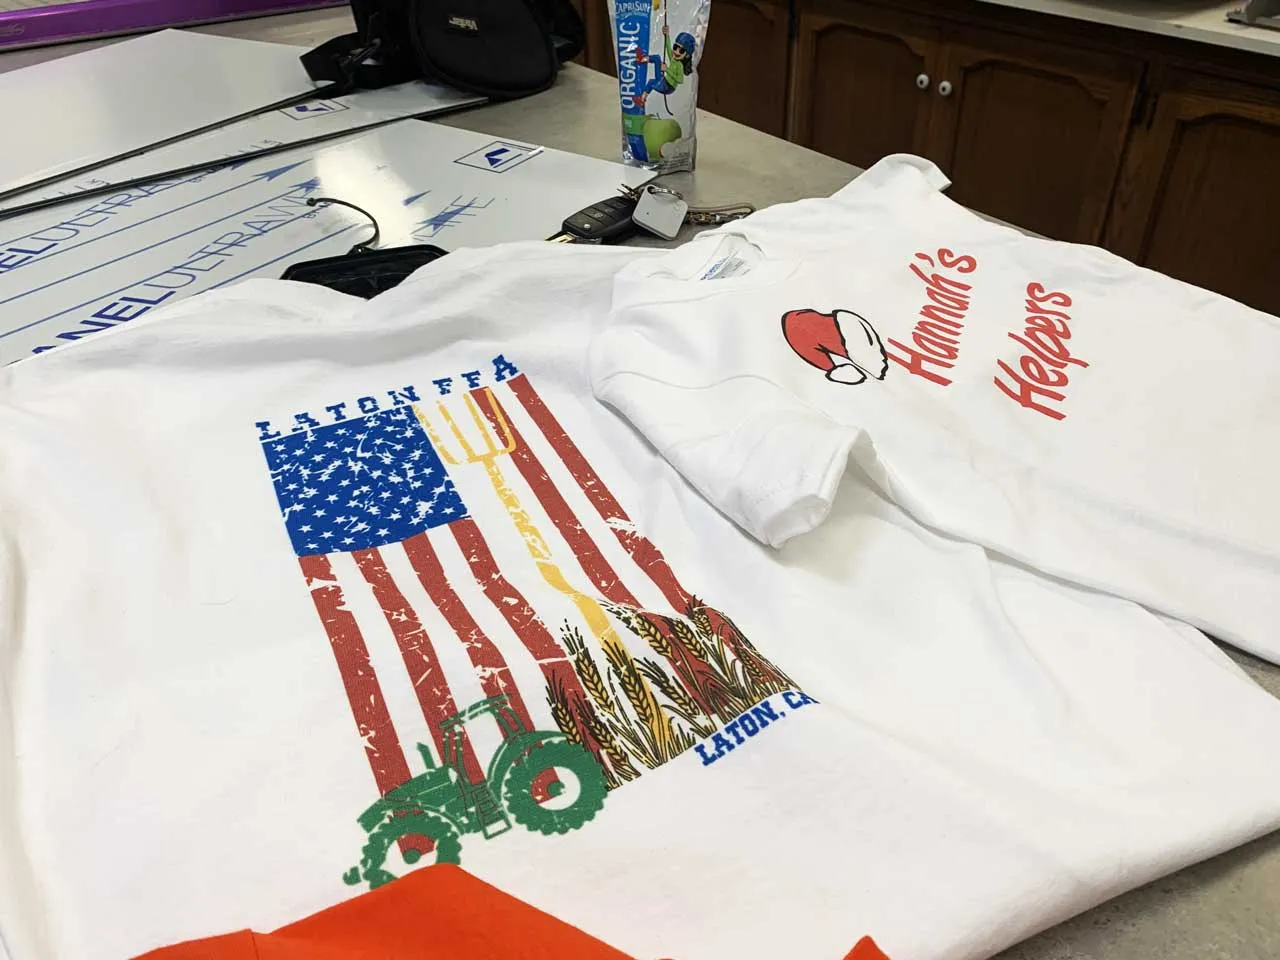 Full Color Printed Shirts near Exeter